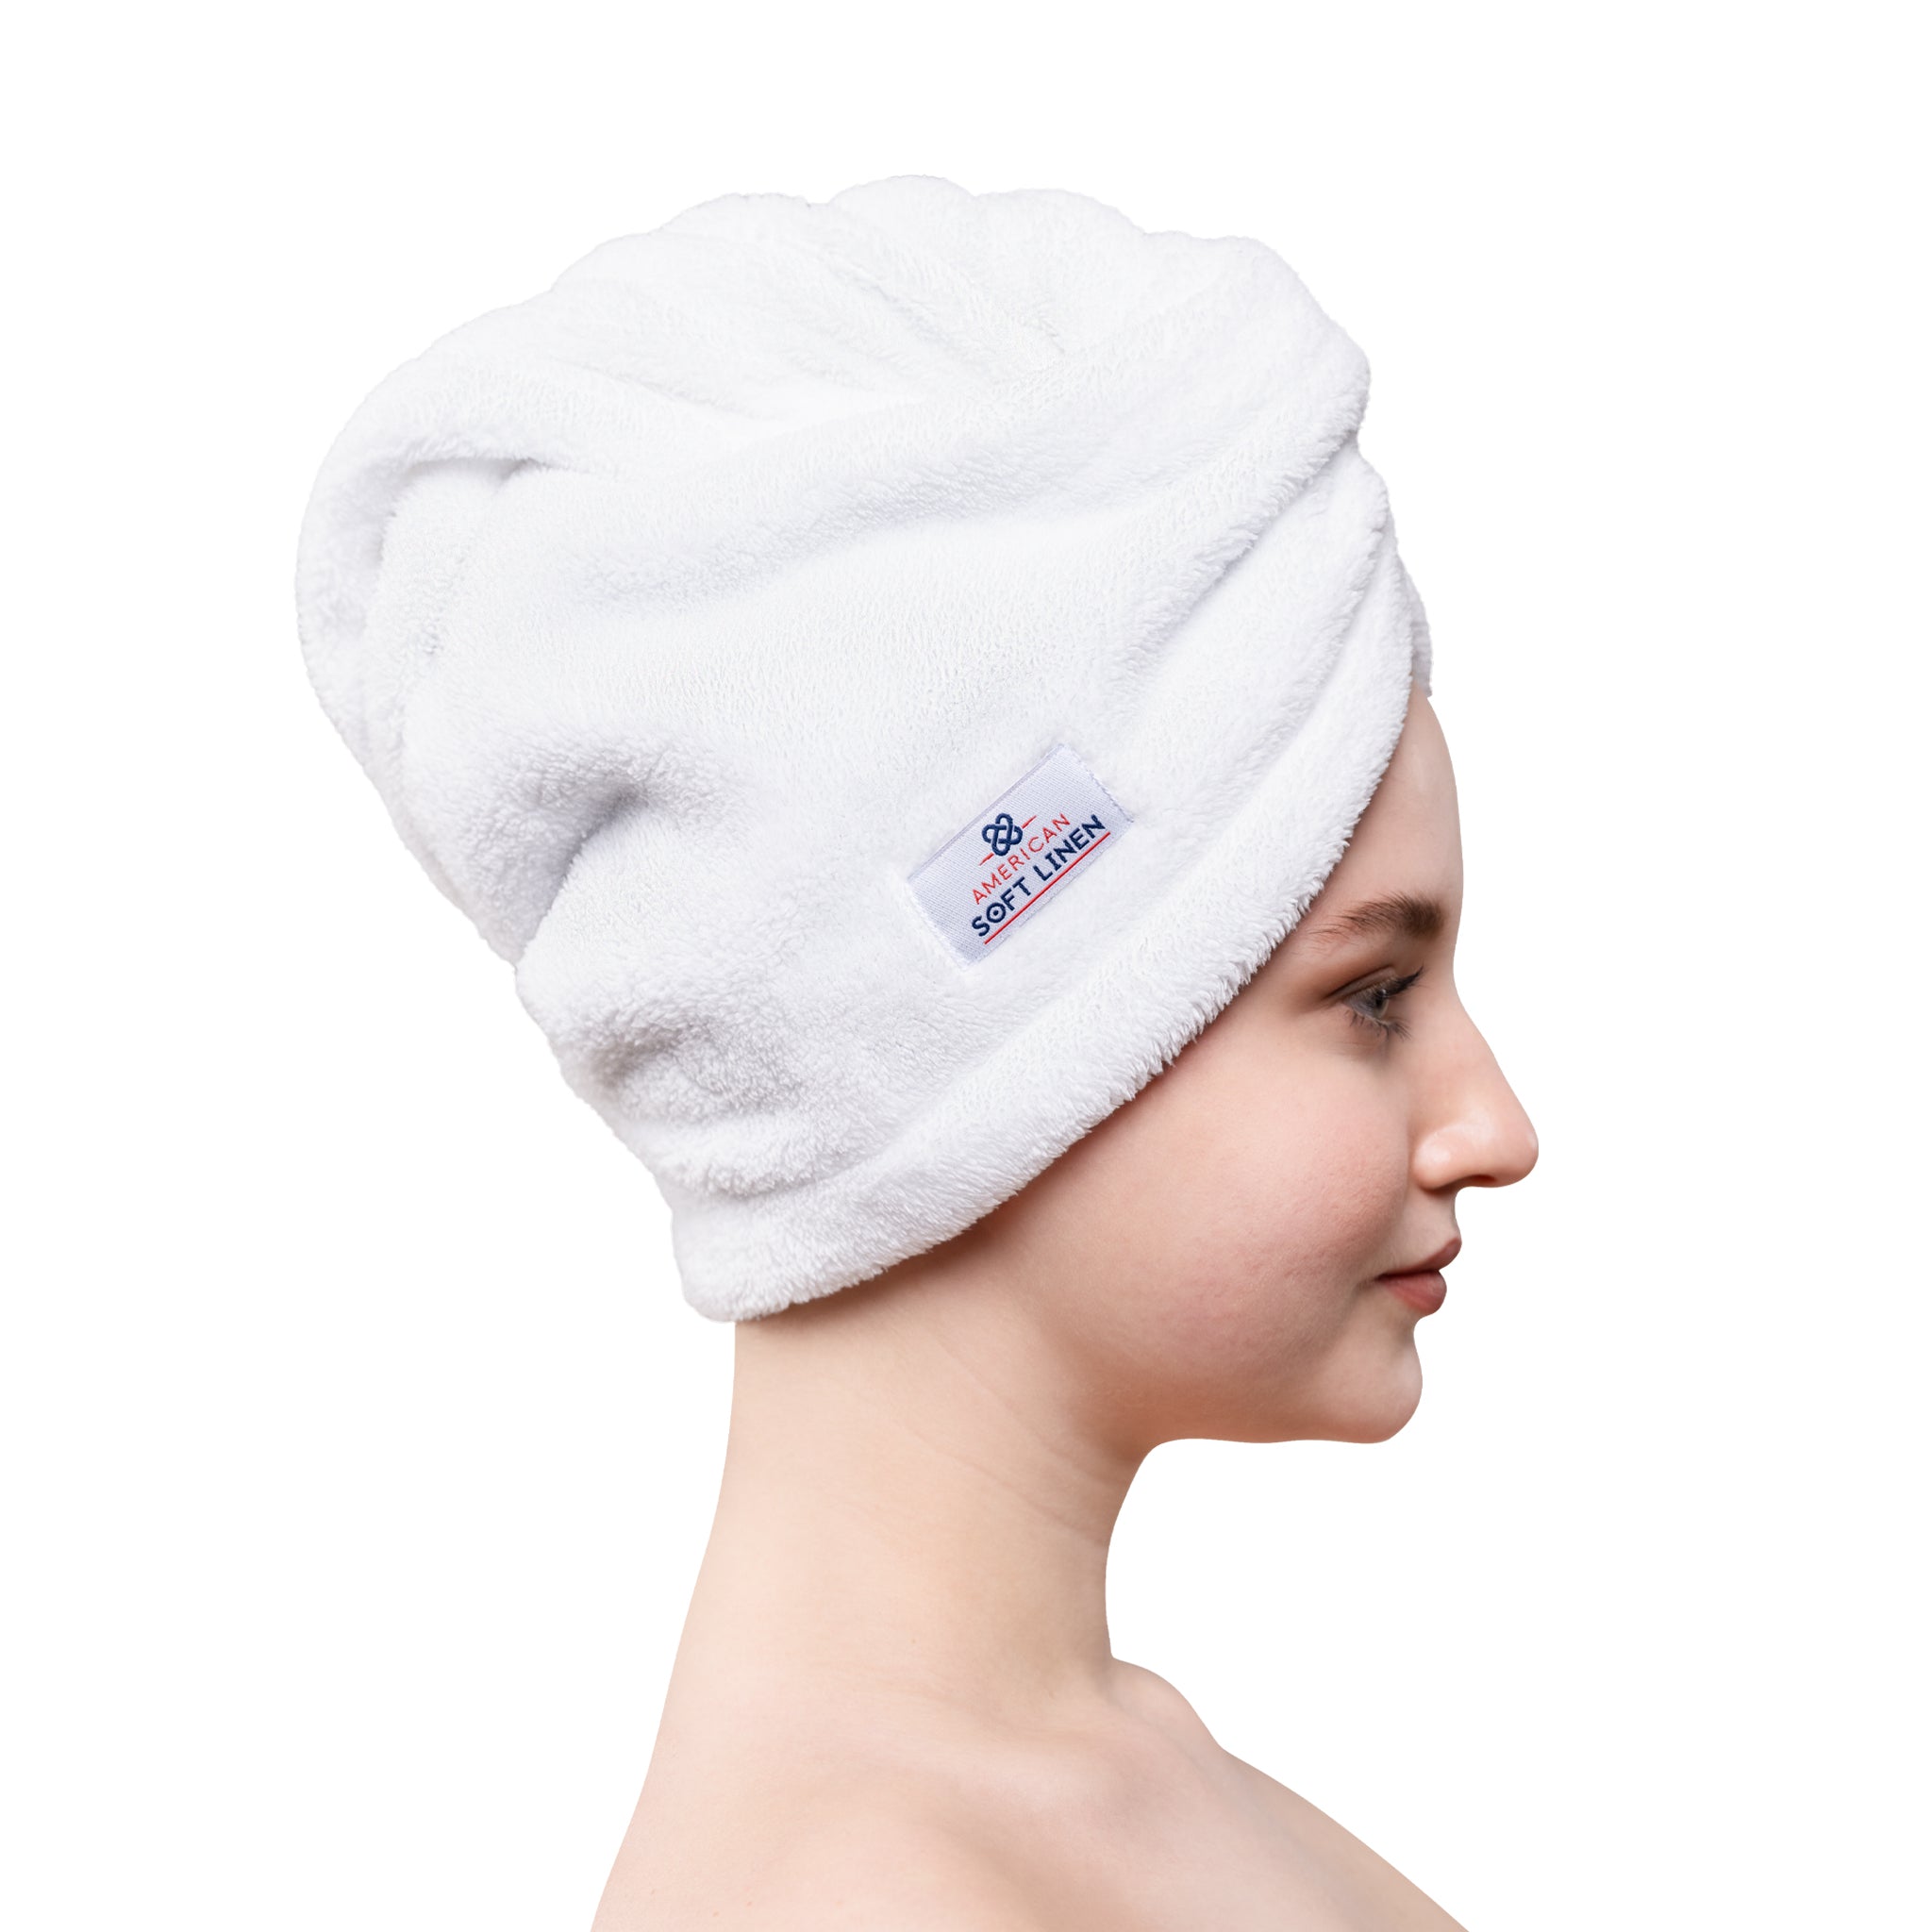 American Soft Linen Extremely Soft Super Absorbent and Fast Drying Hair Towel -white-2